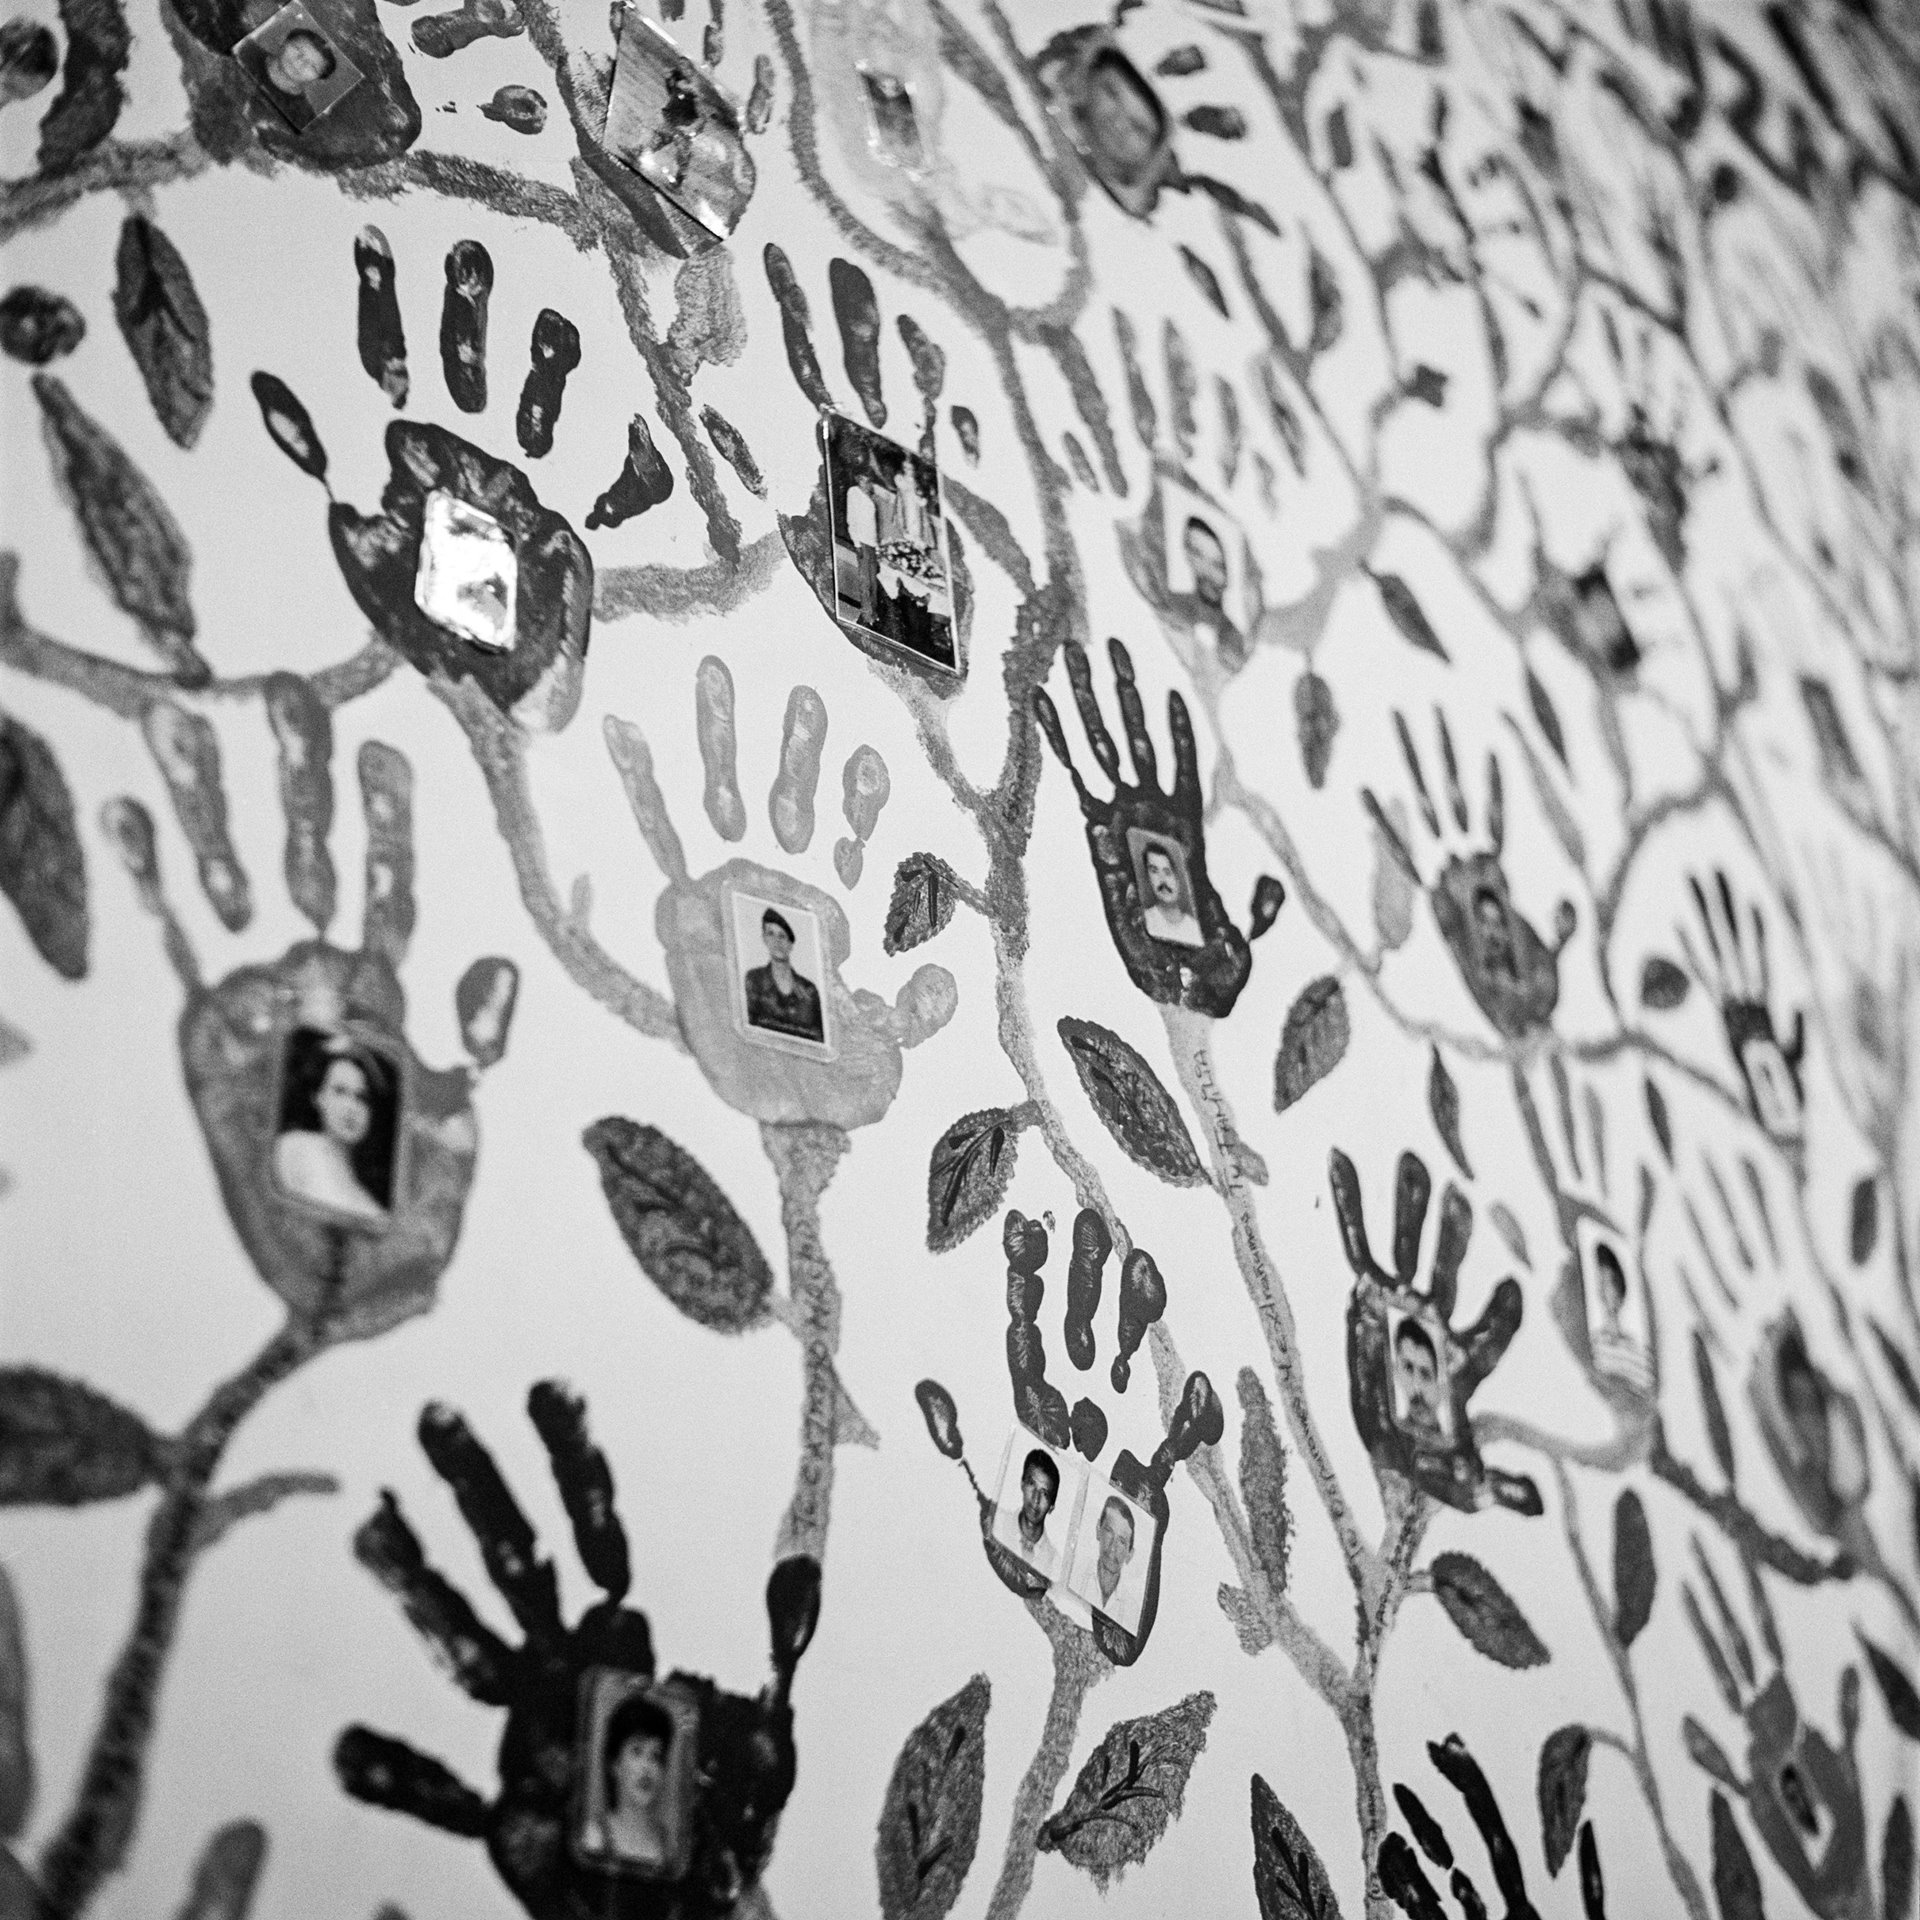 Handprints of relatives of disappeared people and photographs of the missing adorn a wall of the headquarters of the Madres de la Candelaria, an organization created in Medellín, Colombia, in March 1999, in response to the many forced disappearances taking place in the country. Every Friday, female relatives of the disappeared gather to commemorate them and protest their disappearances.